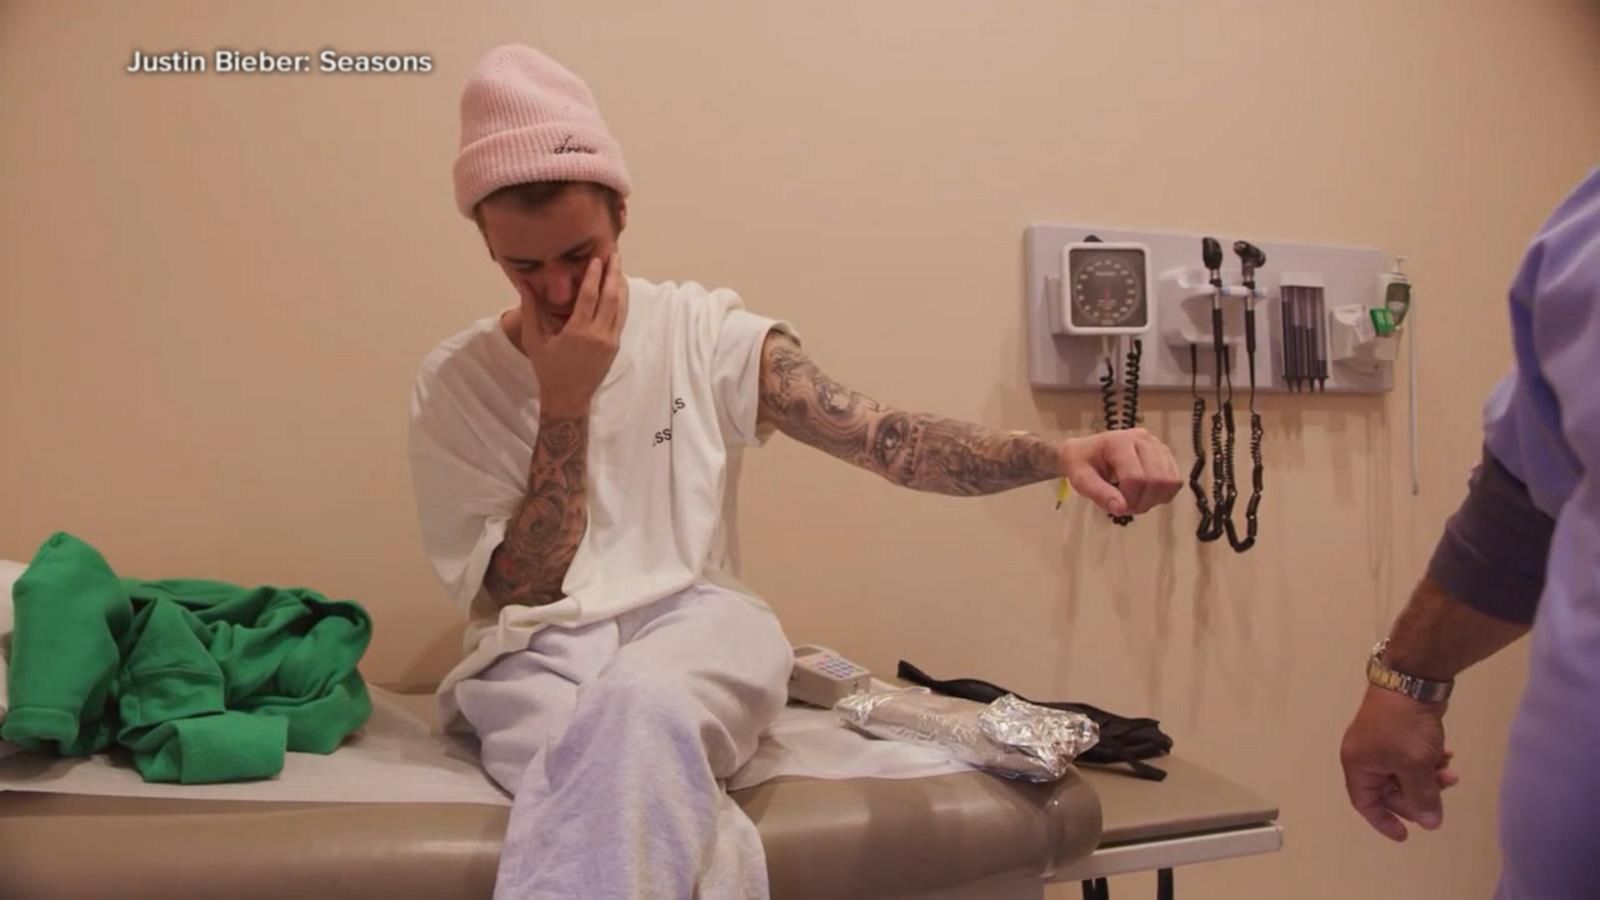 VIDEO: Justin Bieber reveals Ramsay Hunt syndrome diagnosis